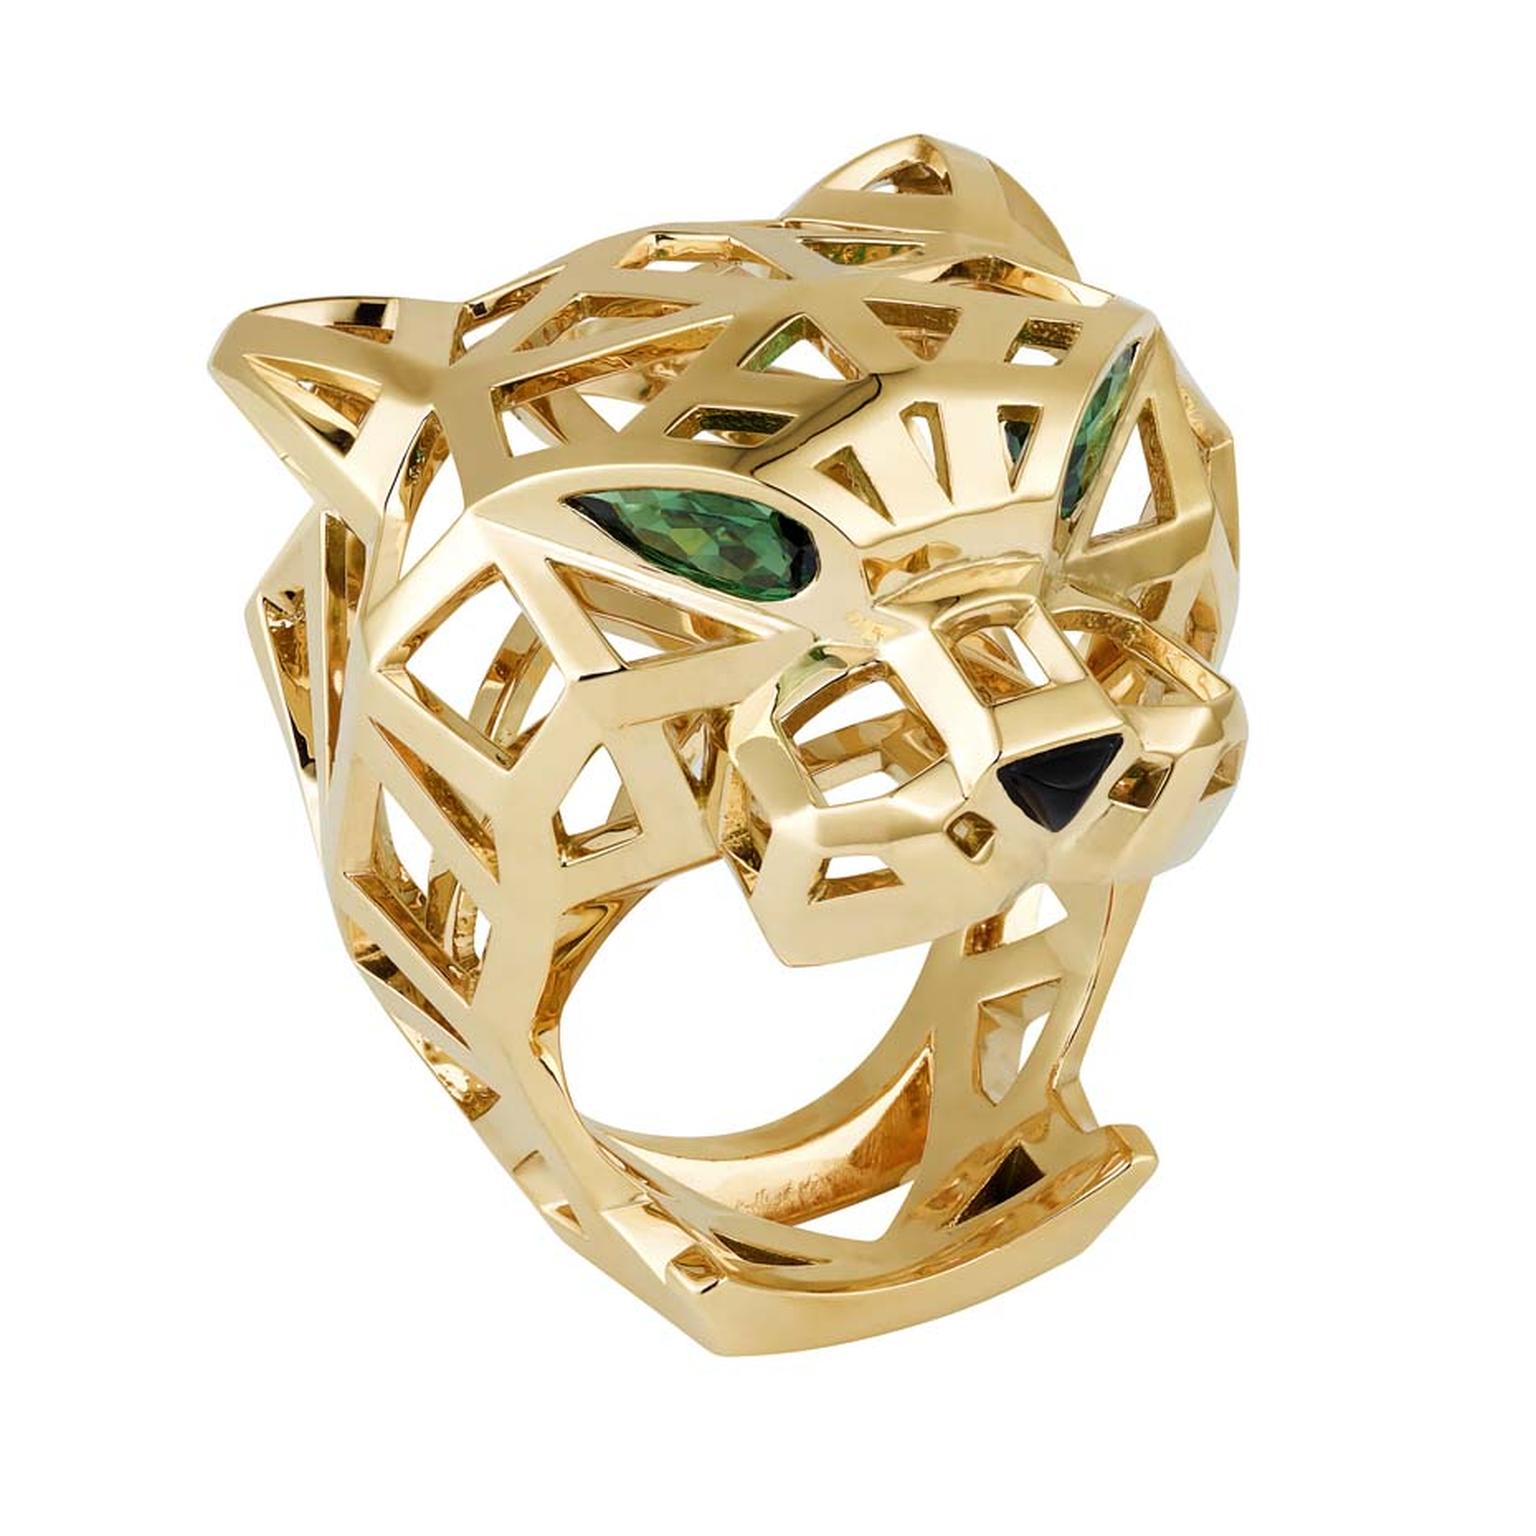 Panthère de Cartier ring in yellow gold with tsavorite garnets and onyx (£14,200).